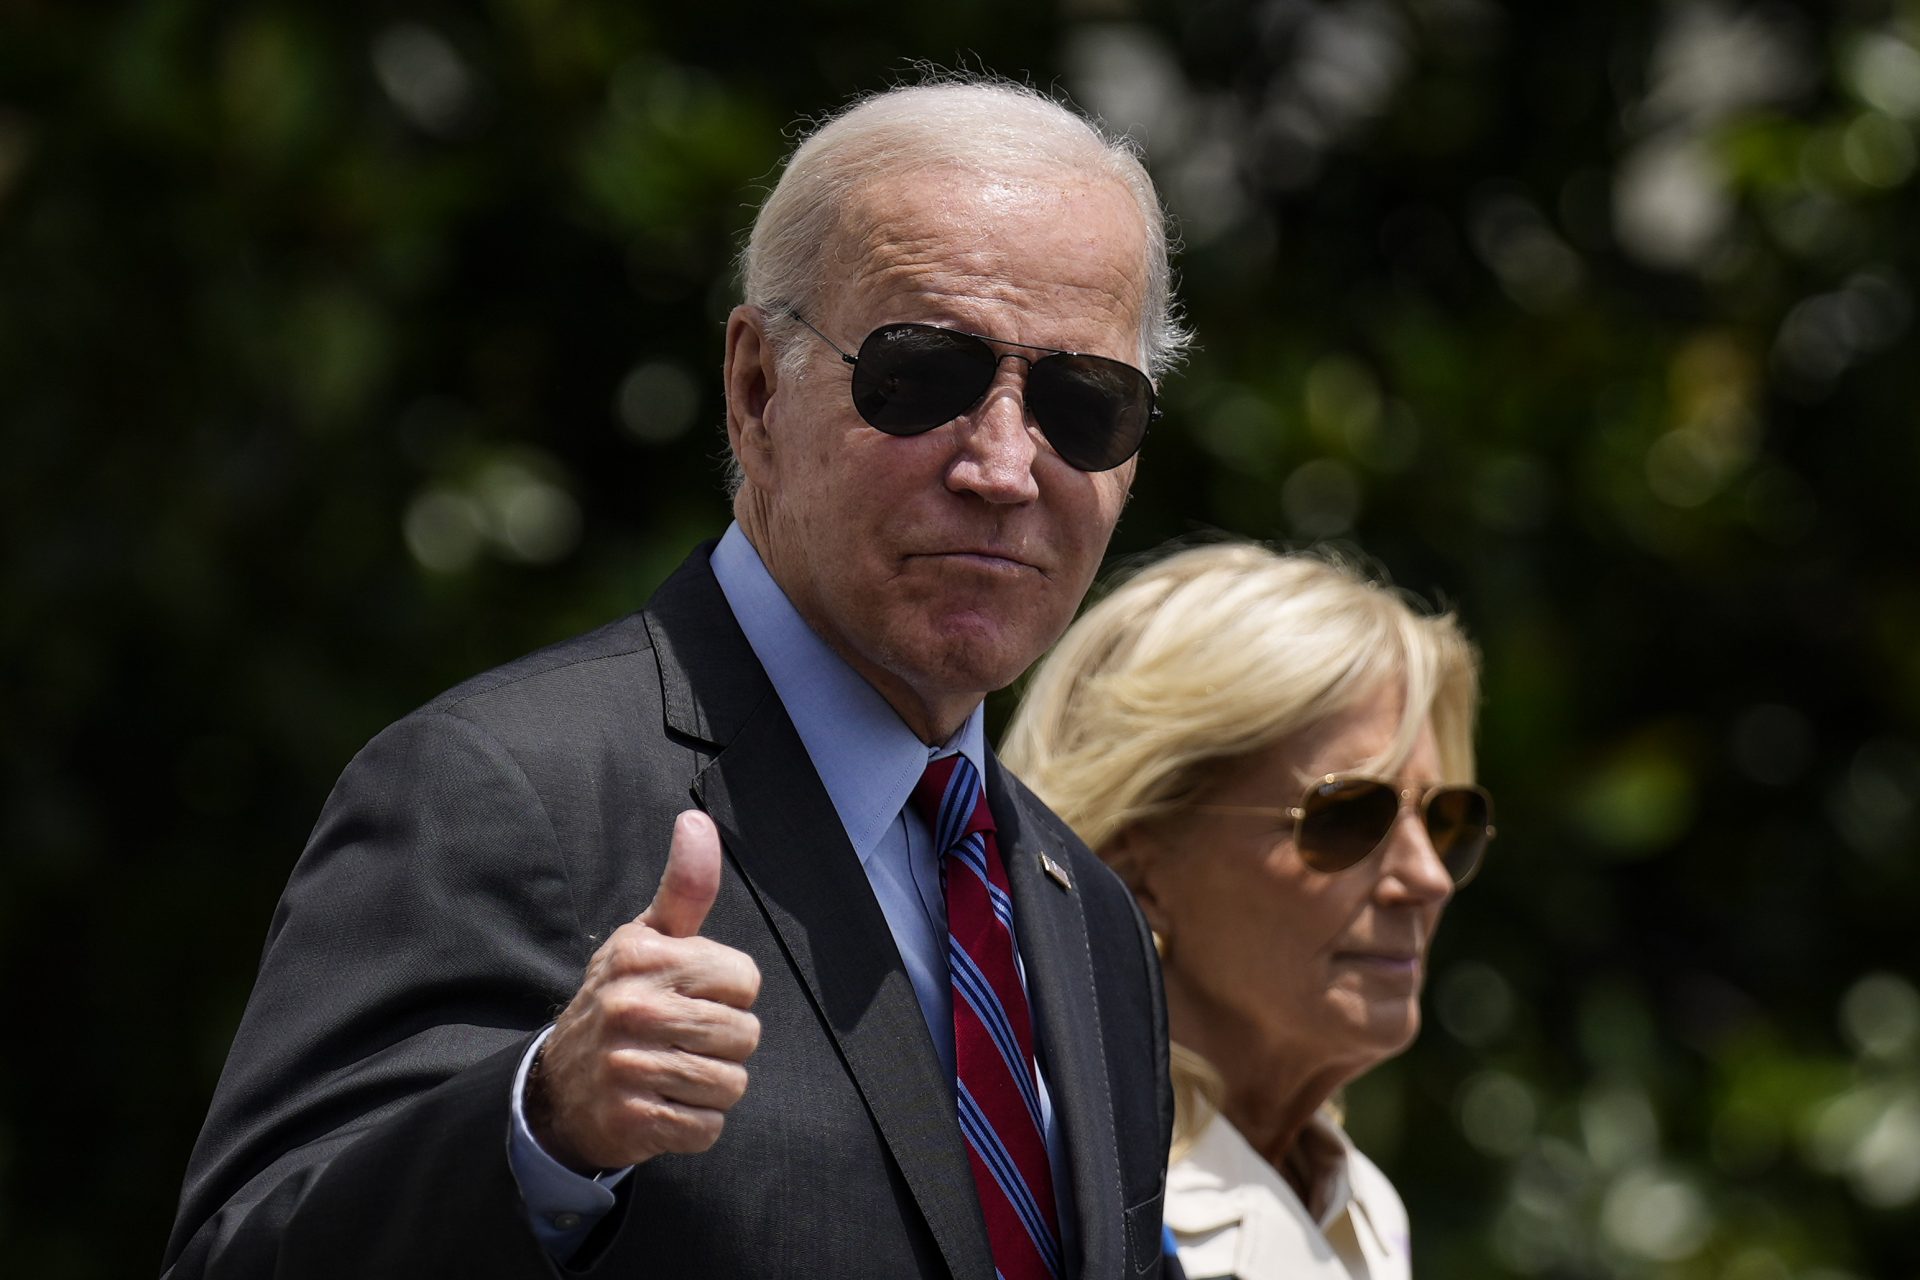 Biden makes waves with reposted video of Marjorie Taylor Greene